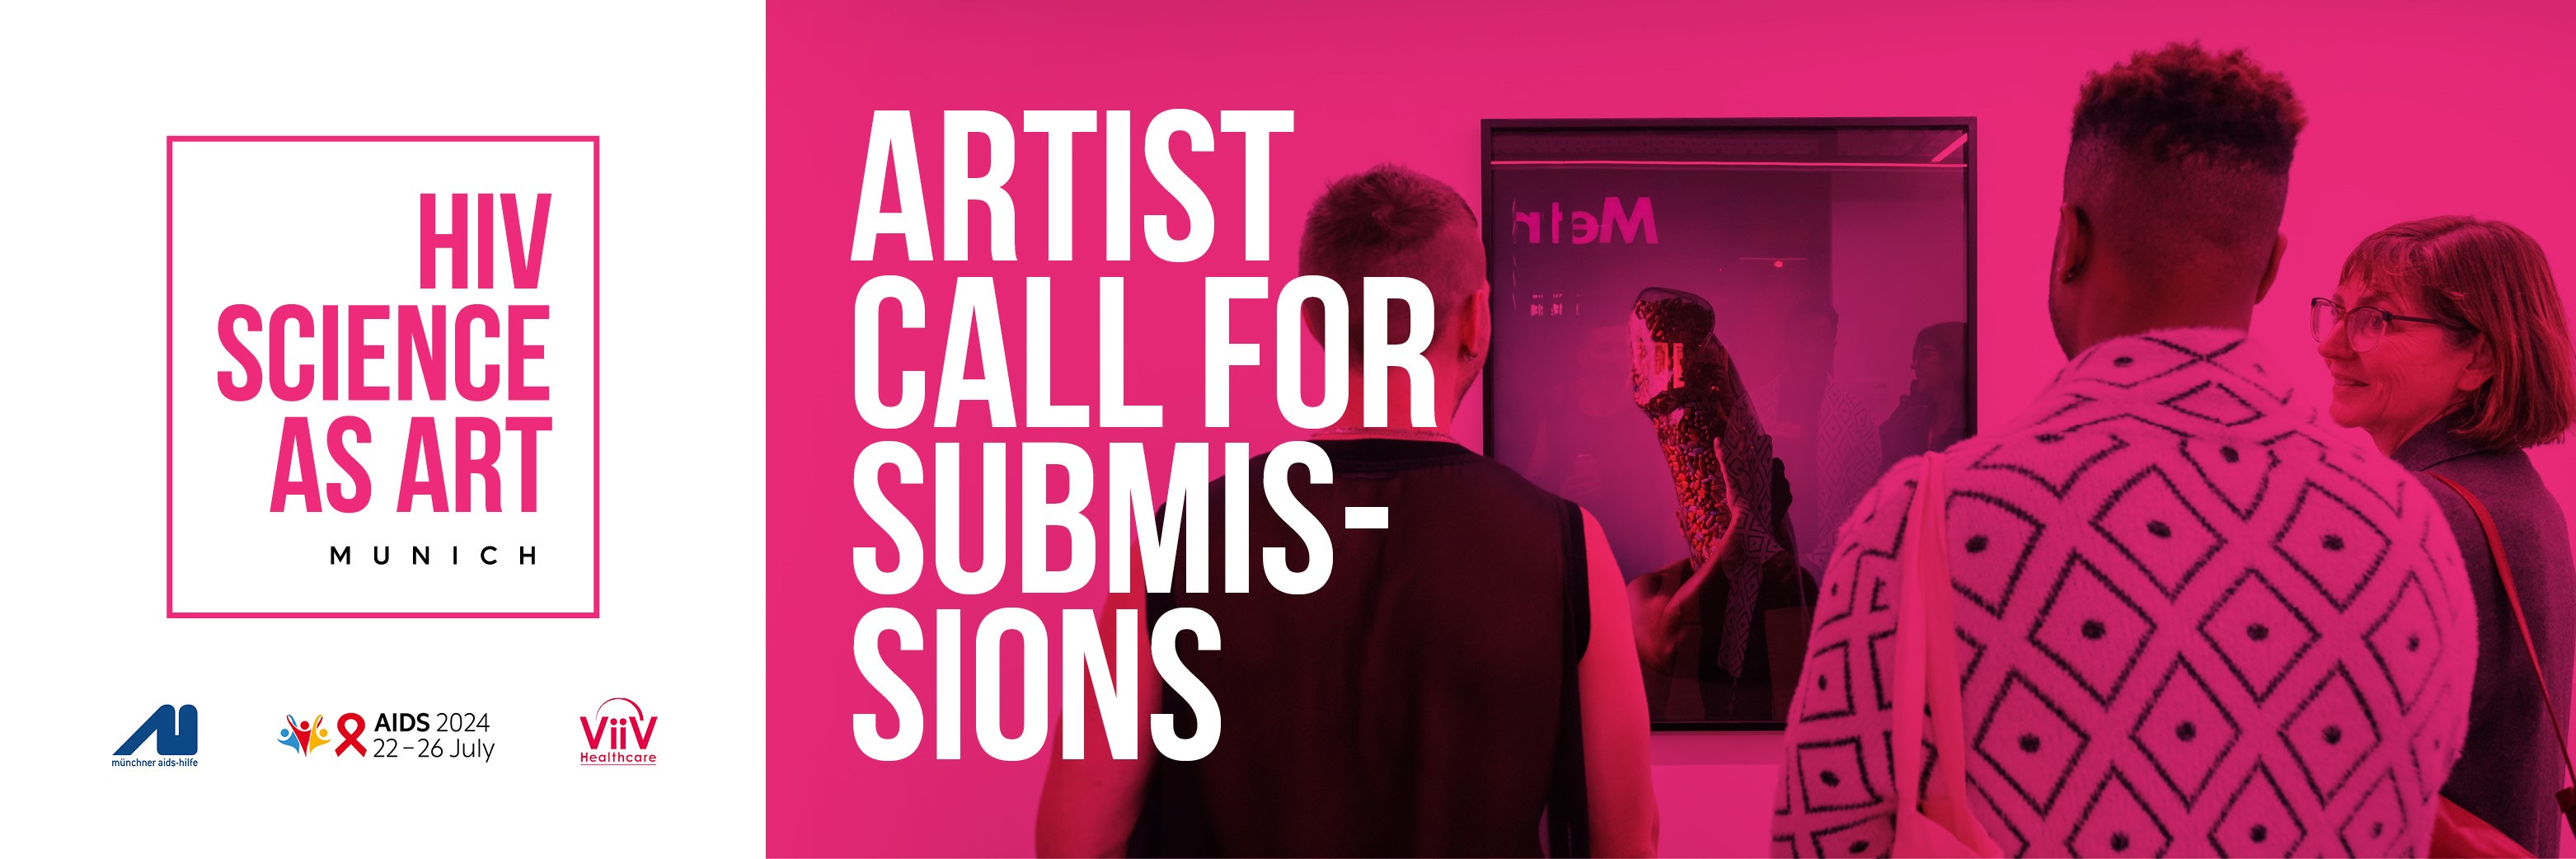 Flyer for HIV Science is Art call for submissions. 